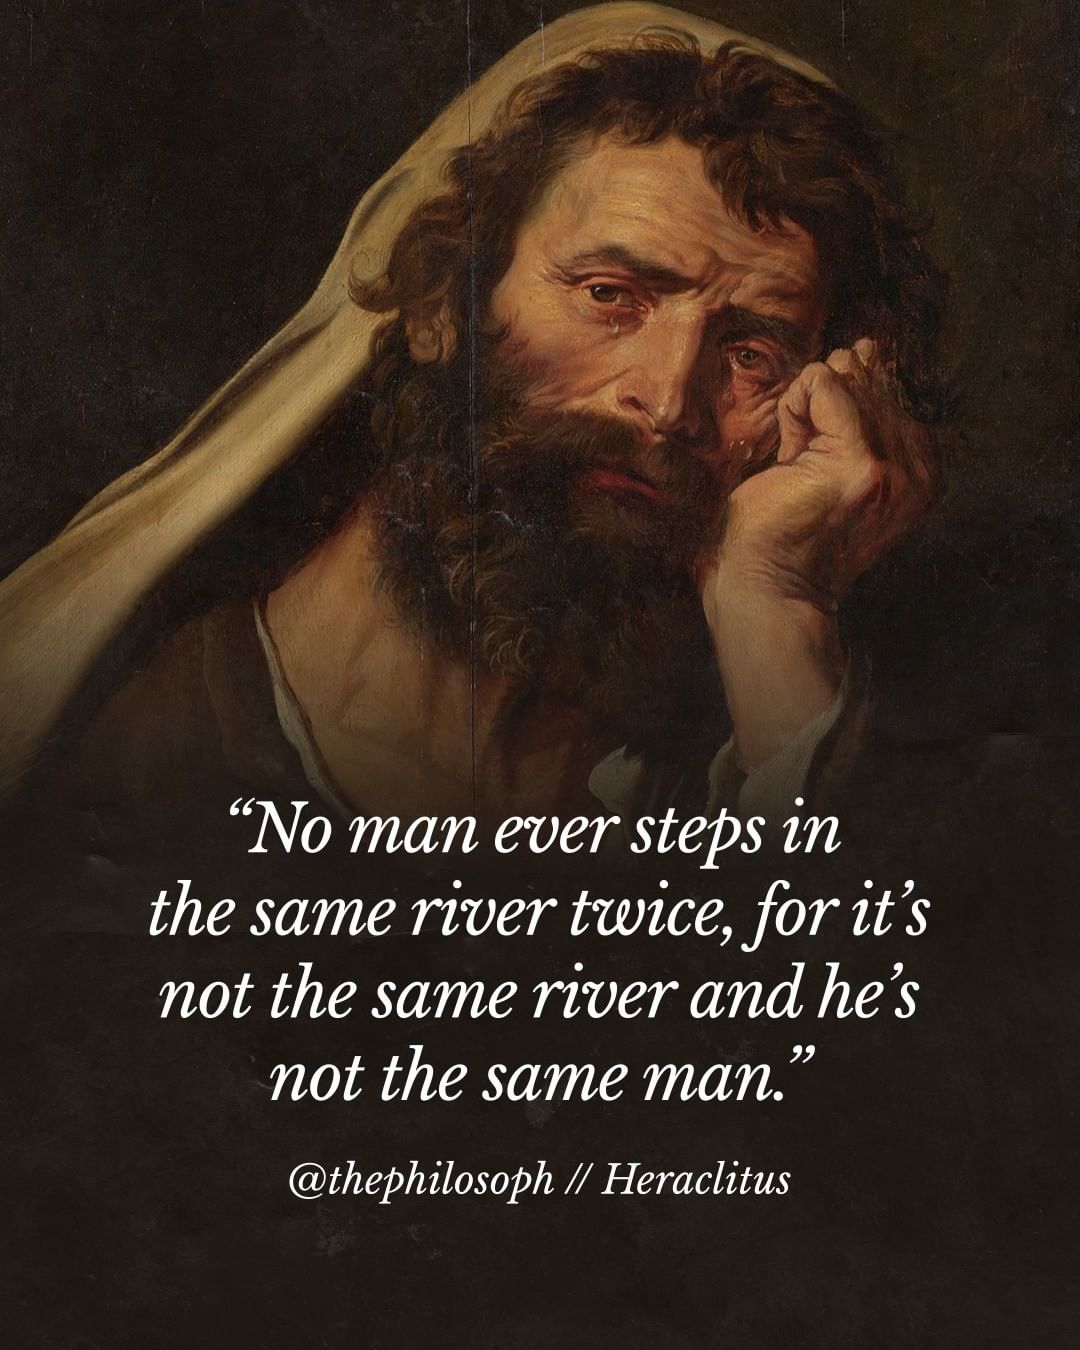 No man ever steps in the same river twice. For it’s not the same river and he’s not the same man. -Heraclitus